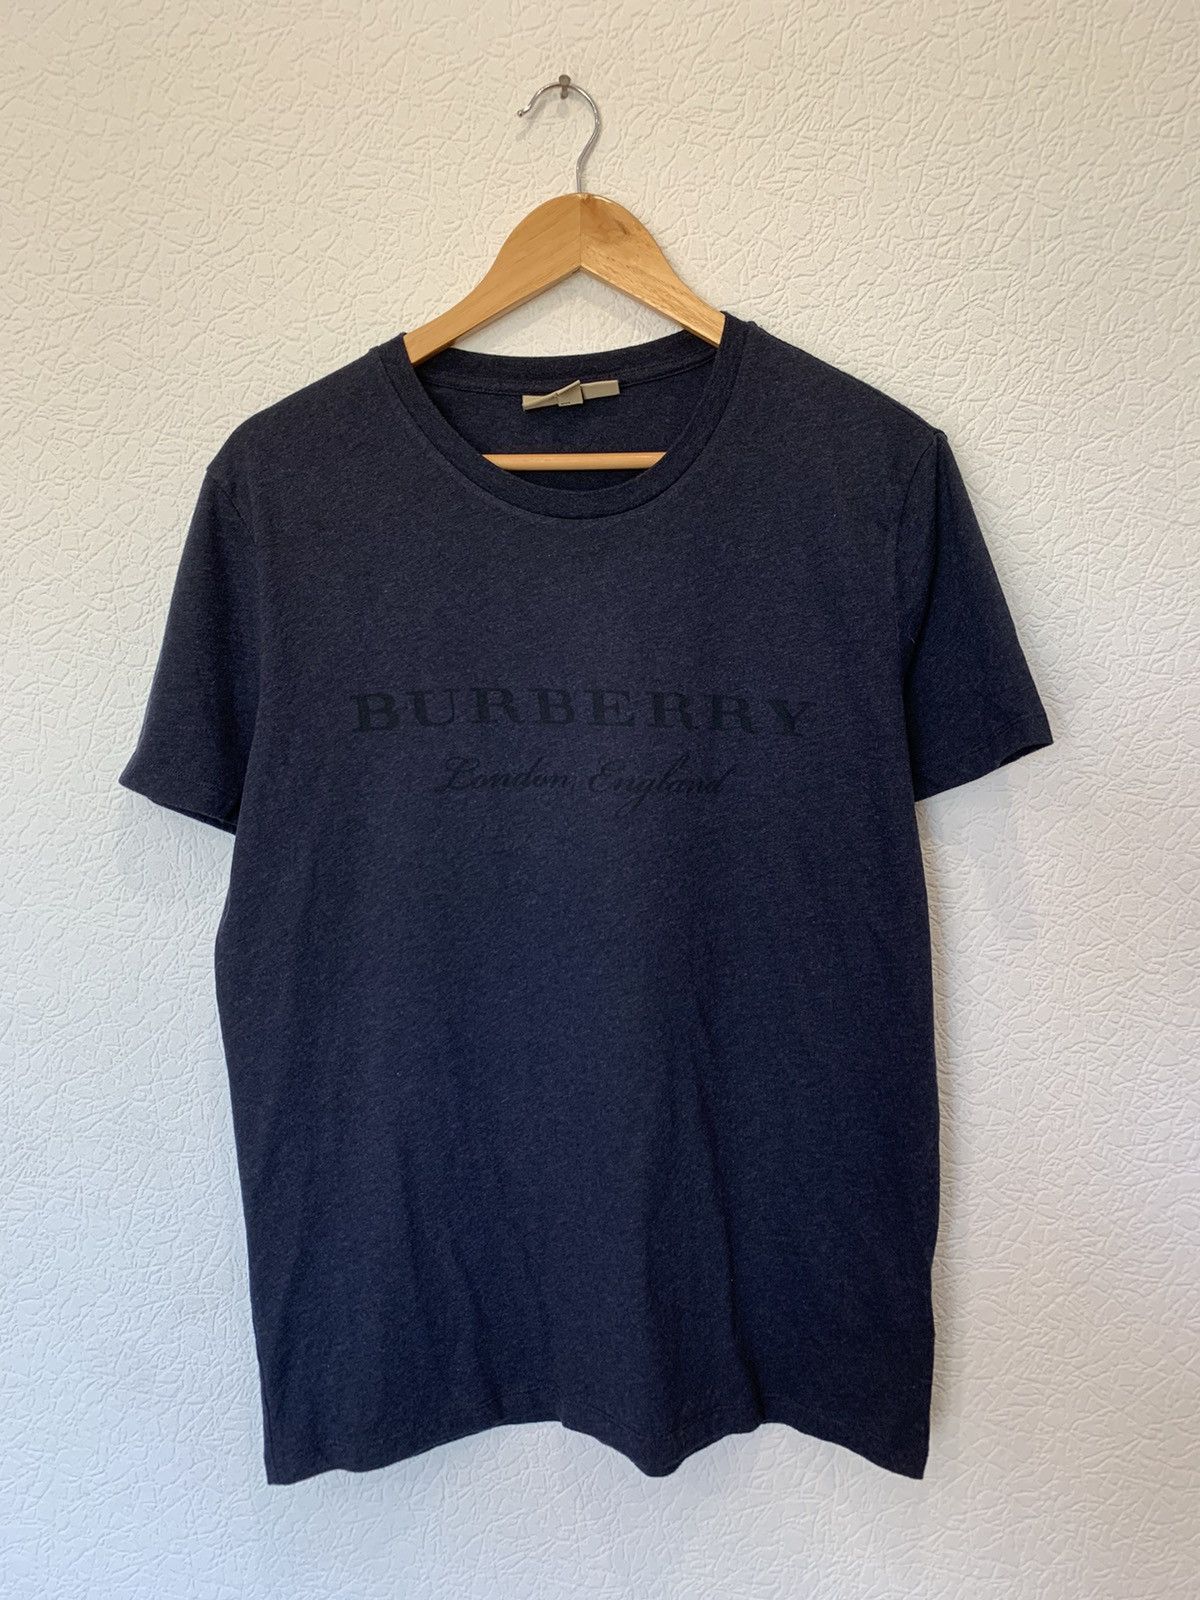 Pre-owned Burberry Blue T Shirt